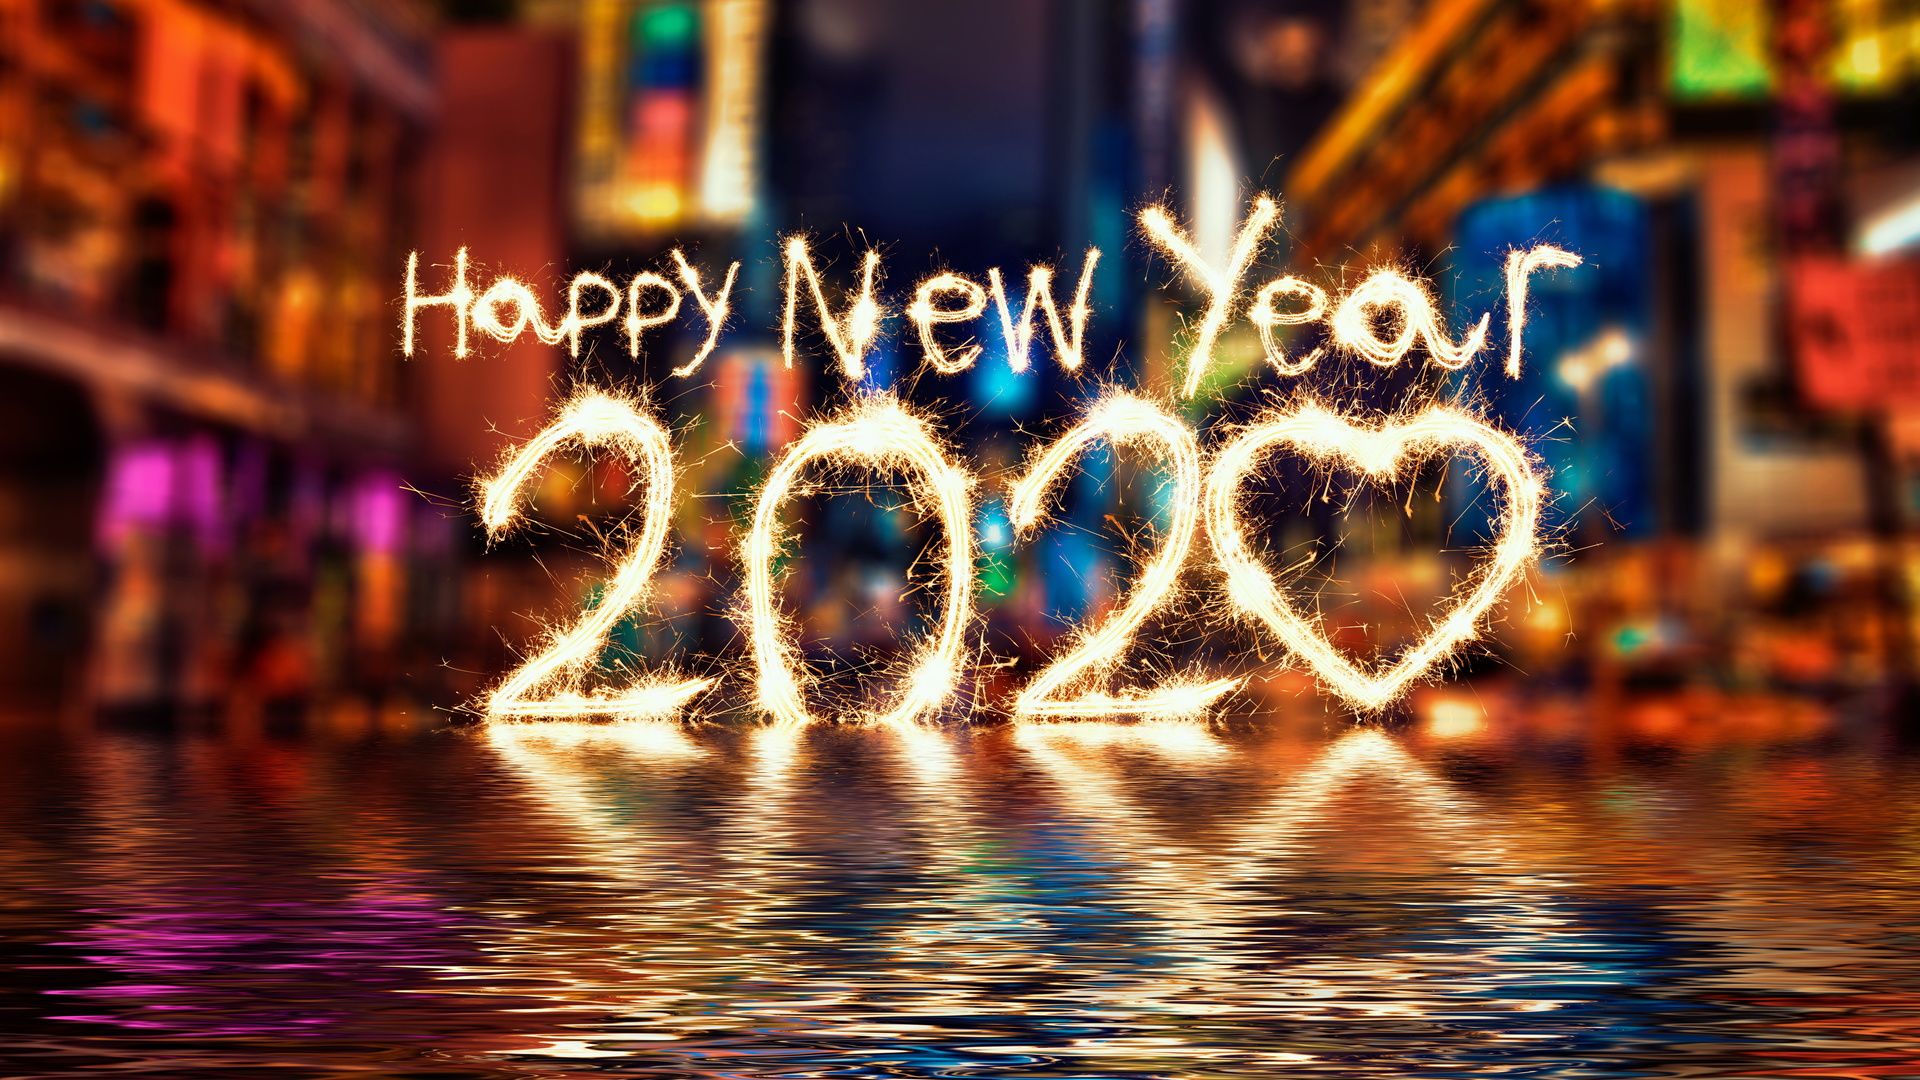 Happy New Year 2020 Wallpapers 30 images   WallpaperBoat